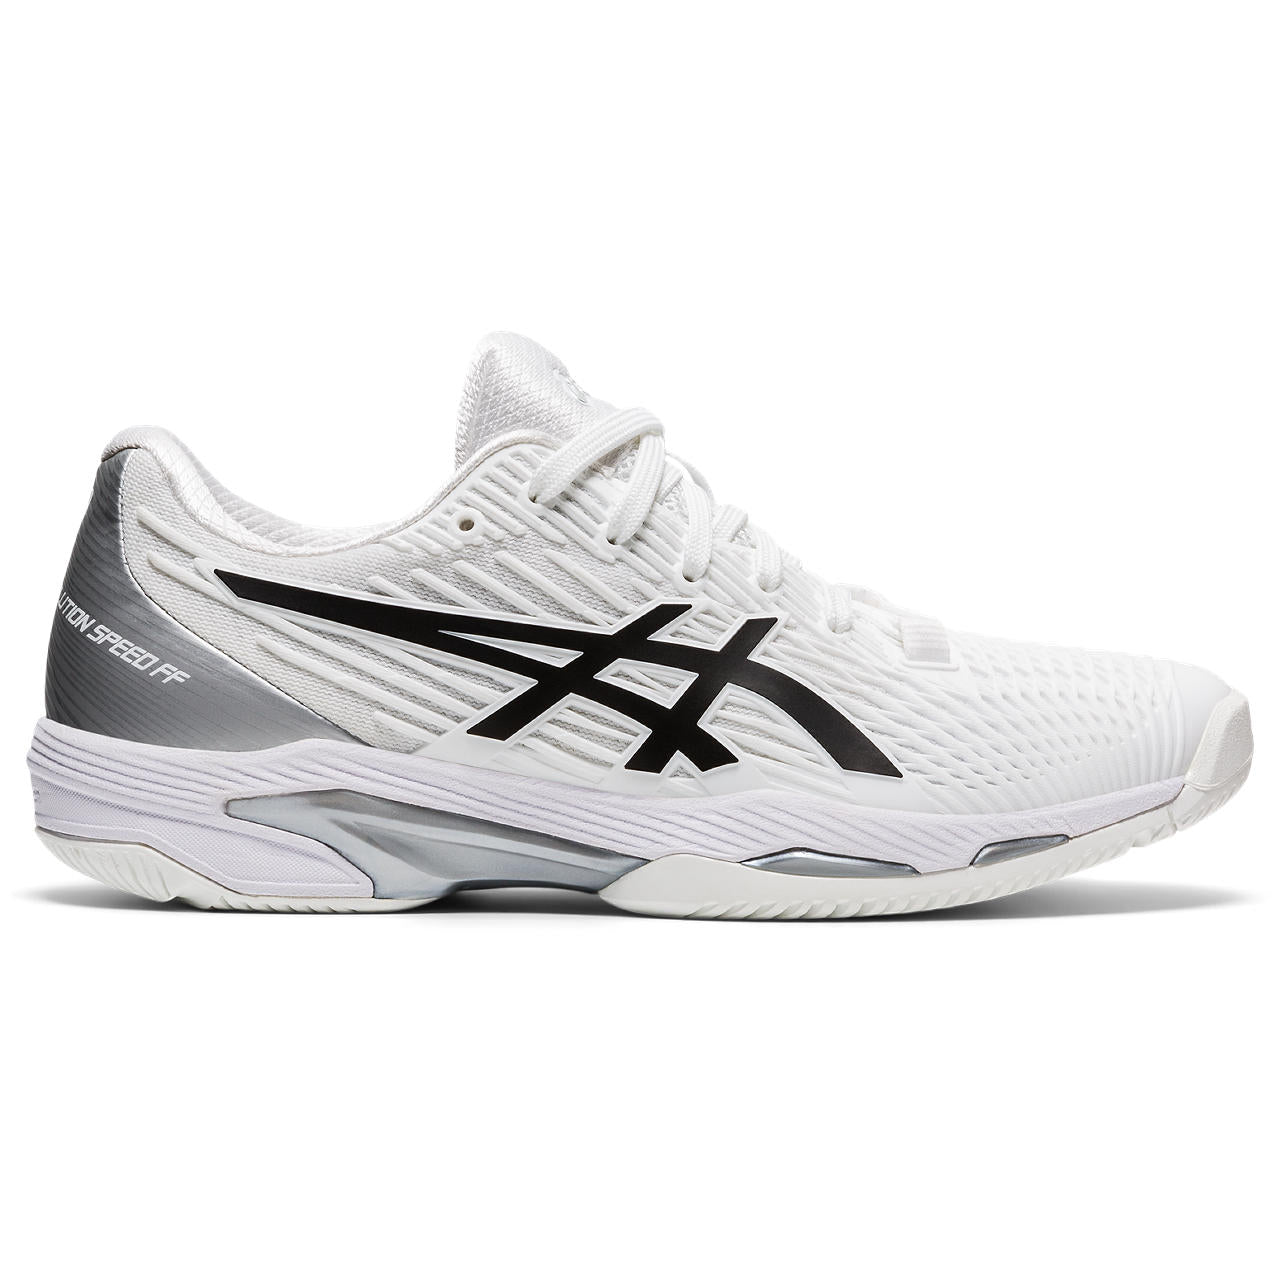 The fastest model in the ASICS tennis range, the Women's Solution Speed FF 2 is all about helping players expand their territory on the court. Combining better stability and a more flexible fit, this shoe is a recommended choice for athletes that are looking for quicker accelerations to be ahead of the ball.